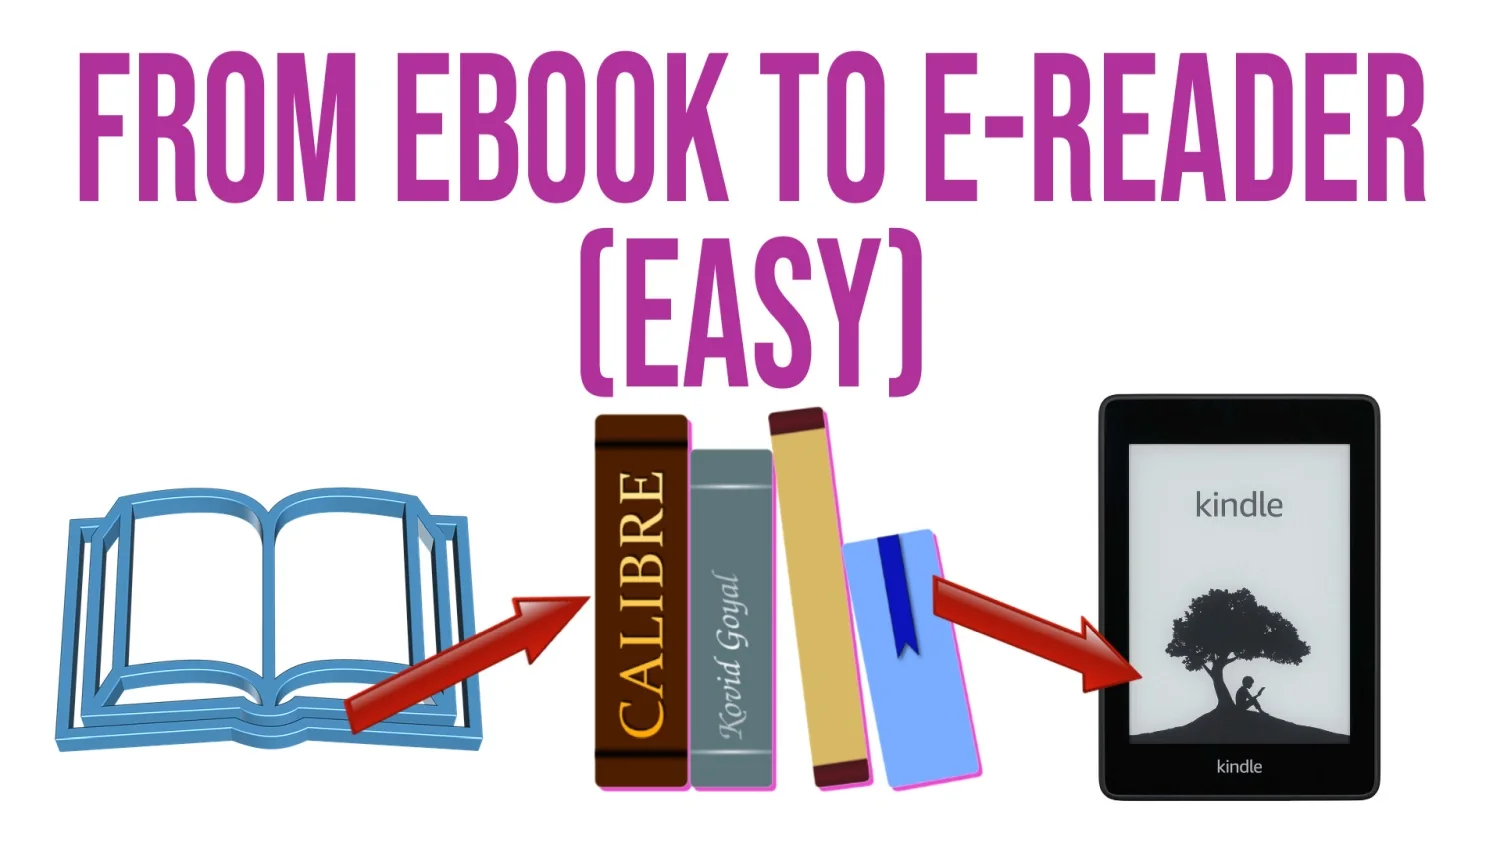 transfer ebook from computer to e-reader how to image